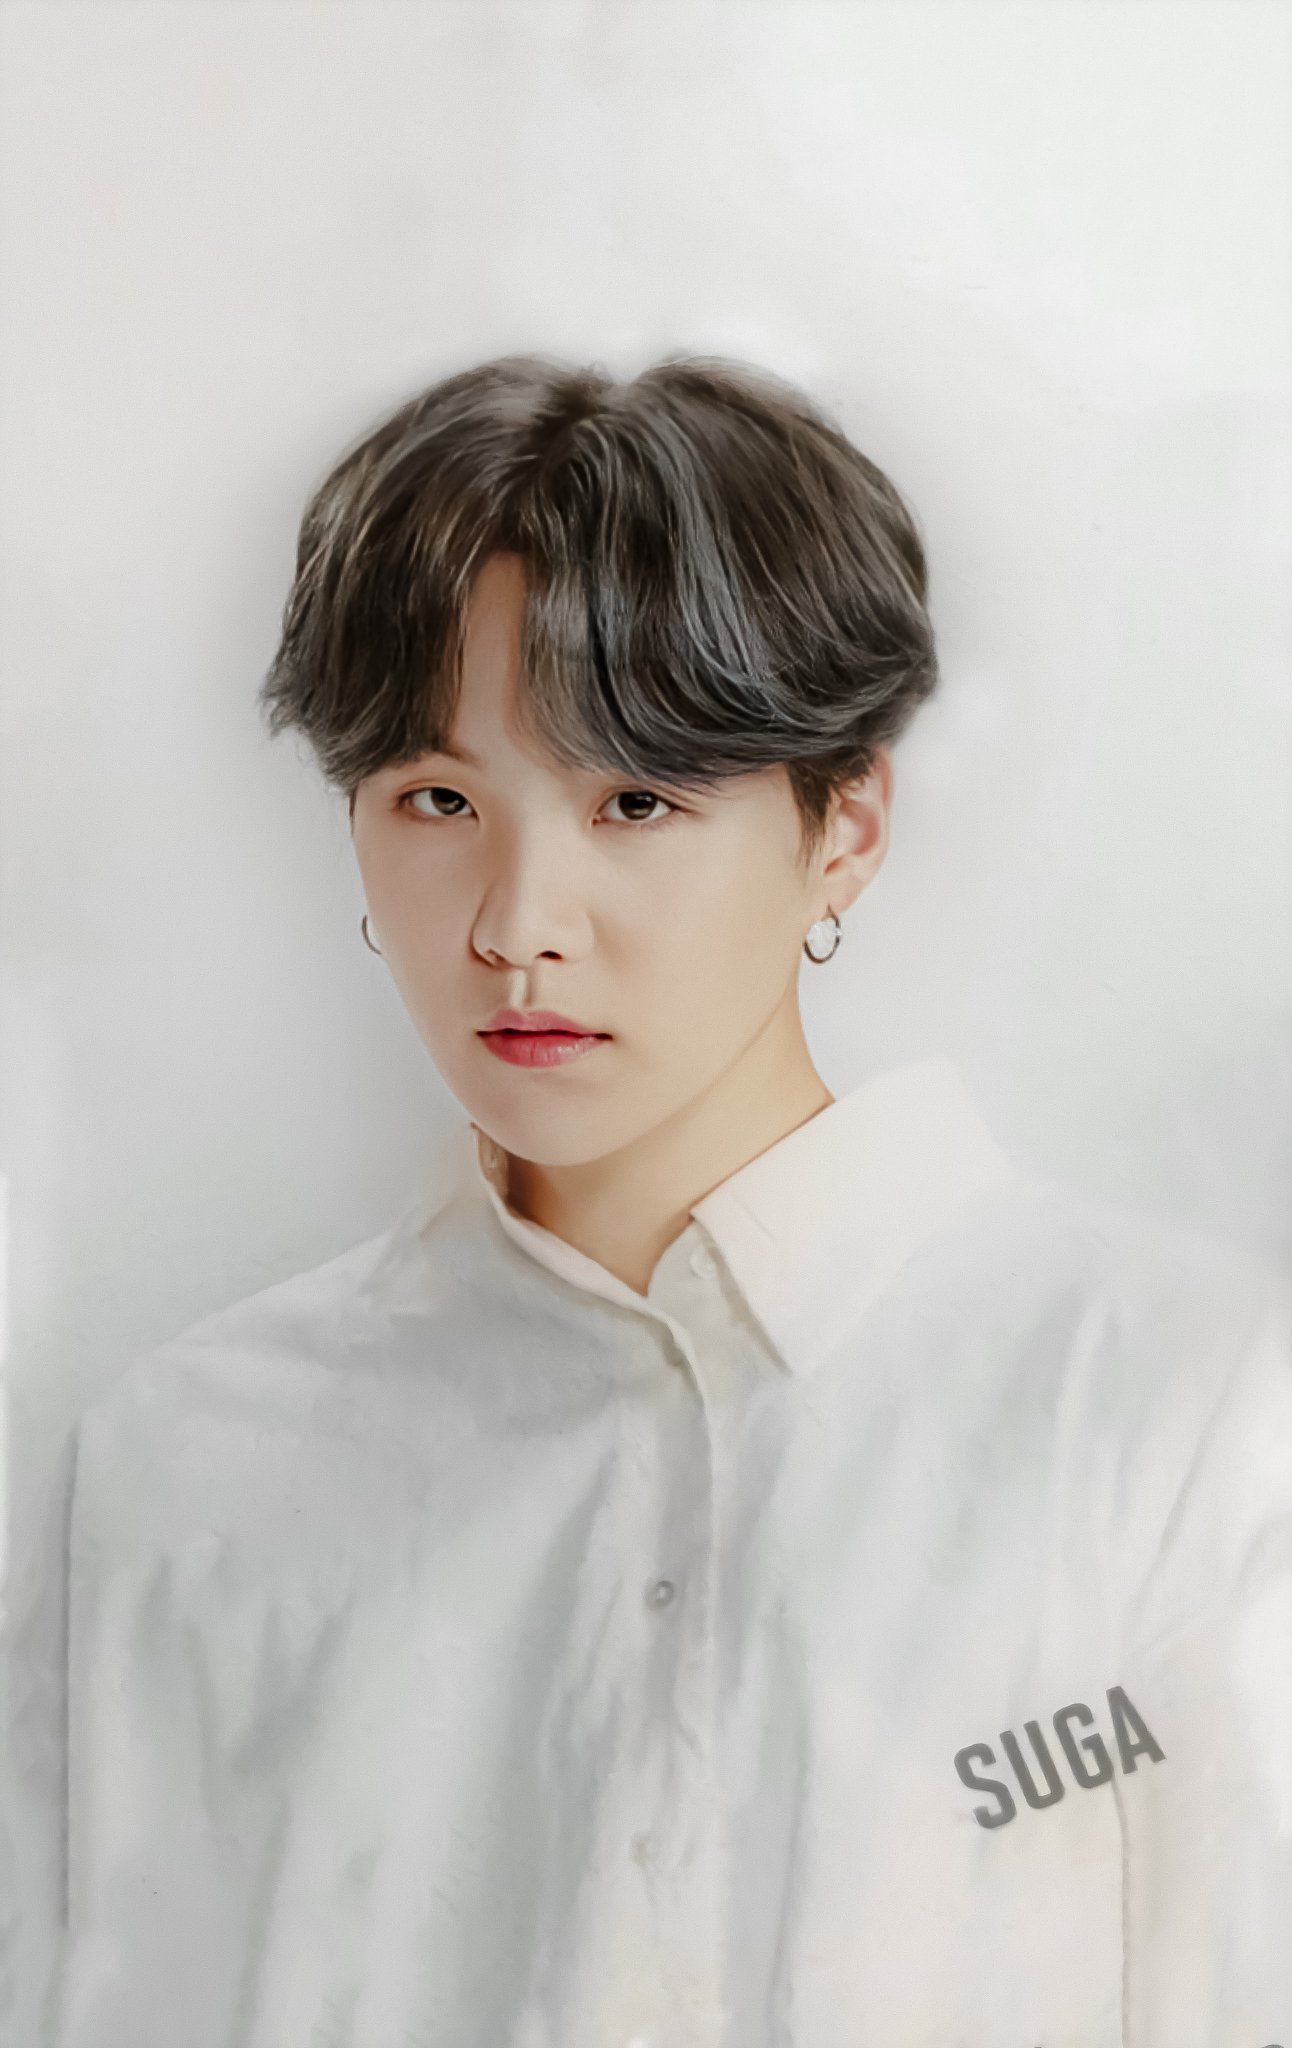 Free download Suga Wallpaper Bts Suga Hd Wallpapers backgrounds Download  564x1001 for your Desktop Mobile  Tablet  Explore 34 Suga Wallpaper   Suga Desktop Wallpapers BTS Suga Phone Wallpapers